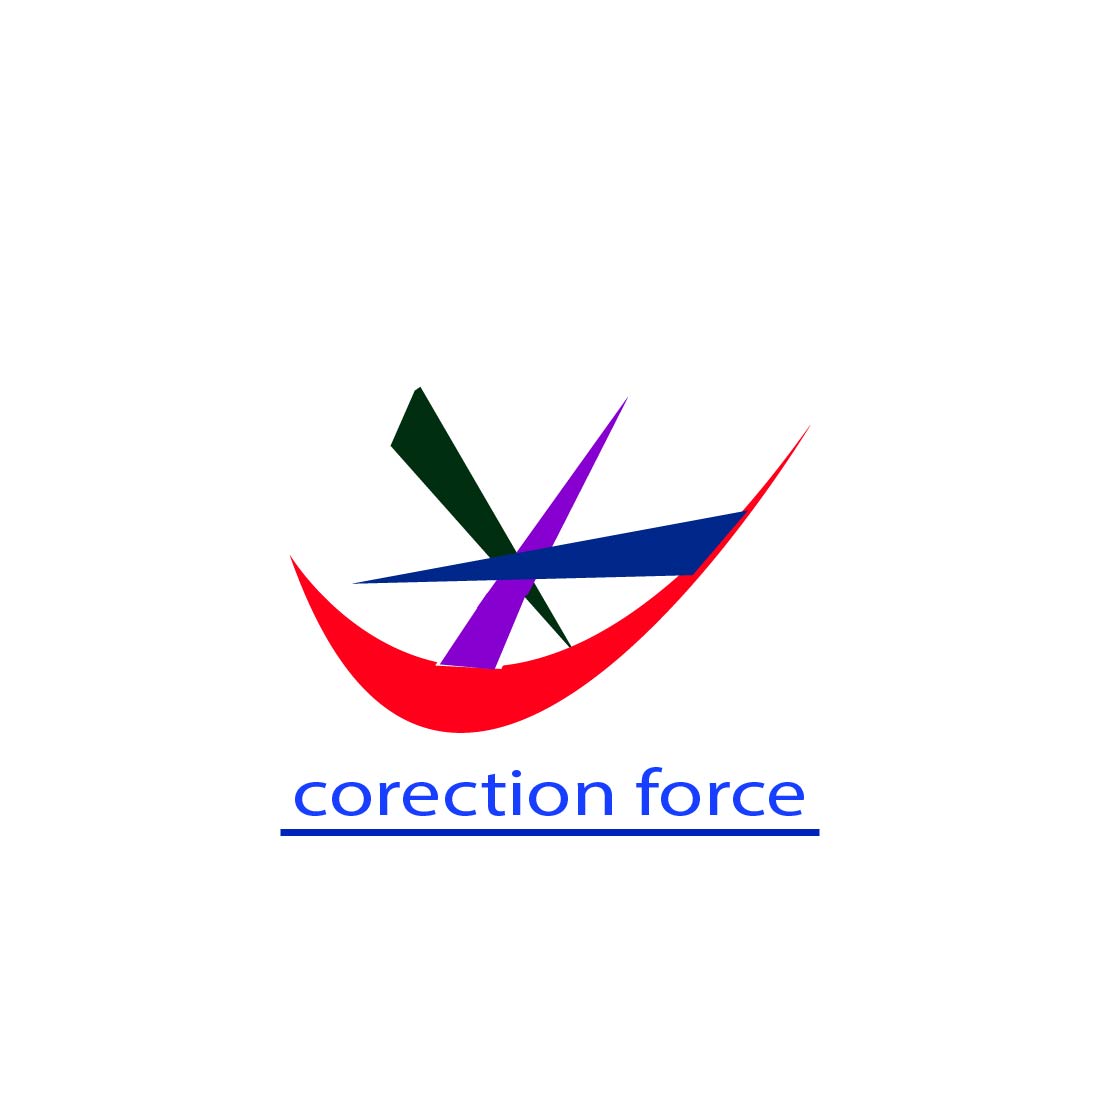 CORECTION FOURCE cover image.